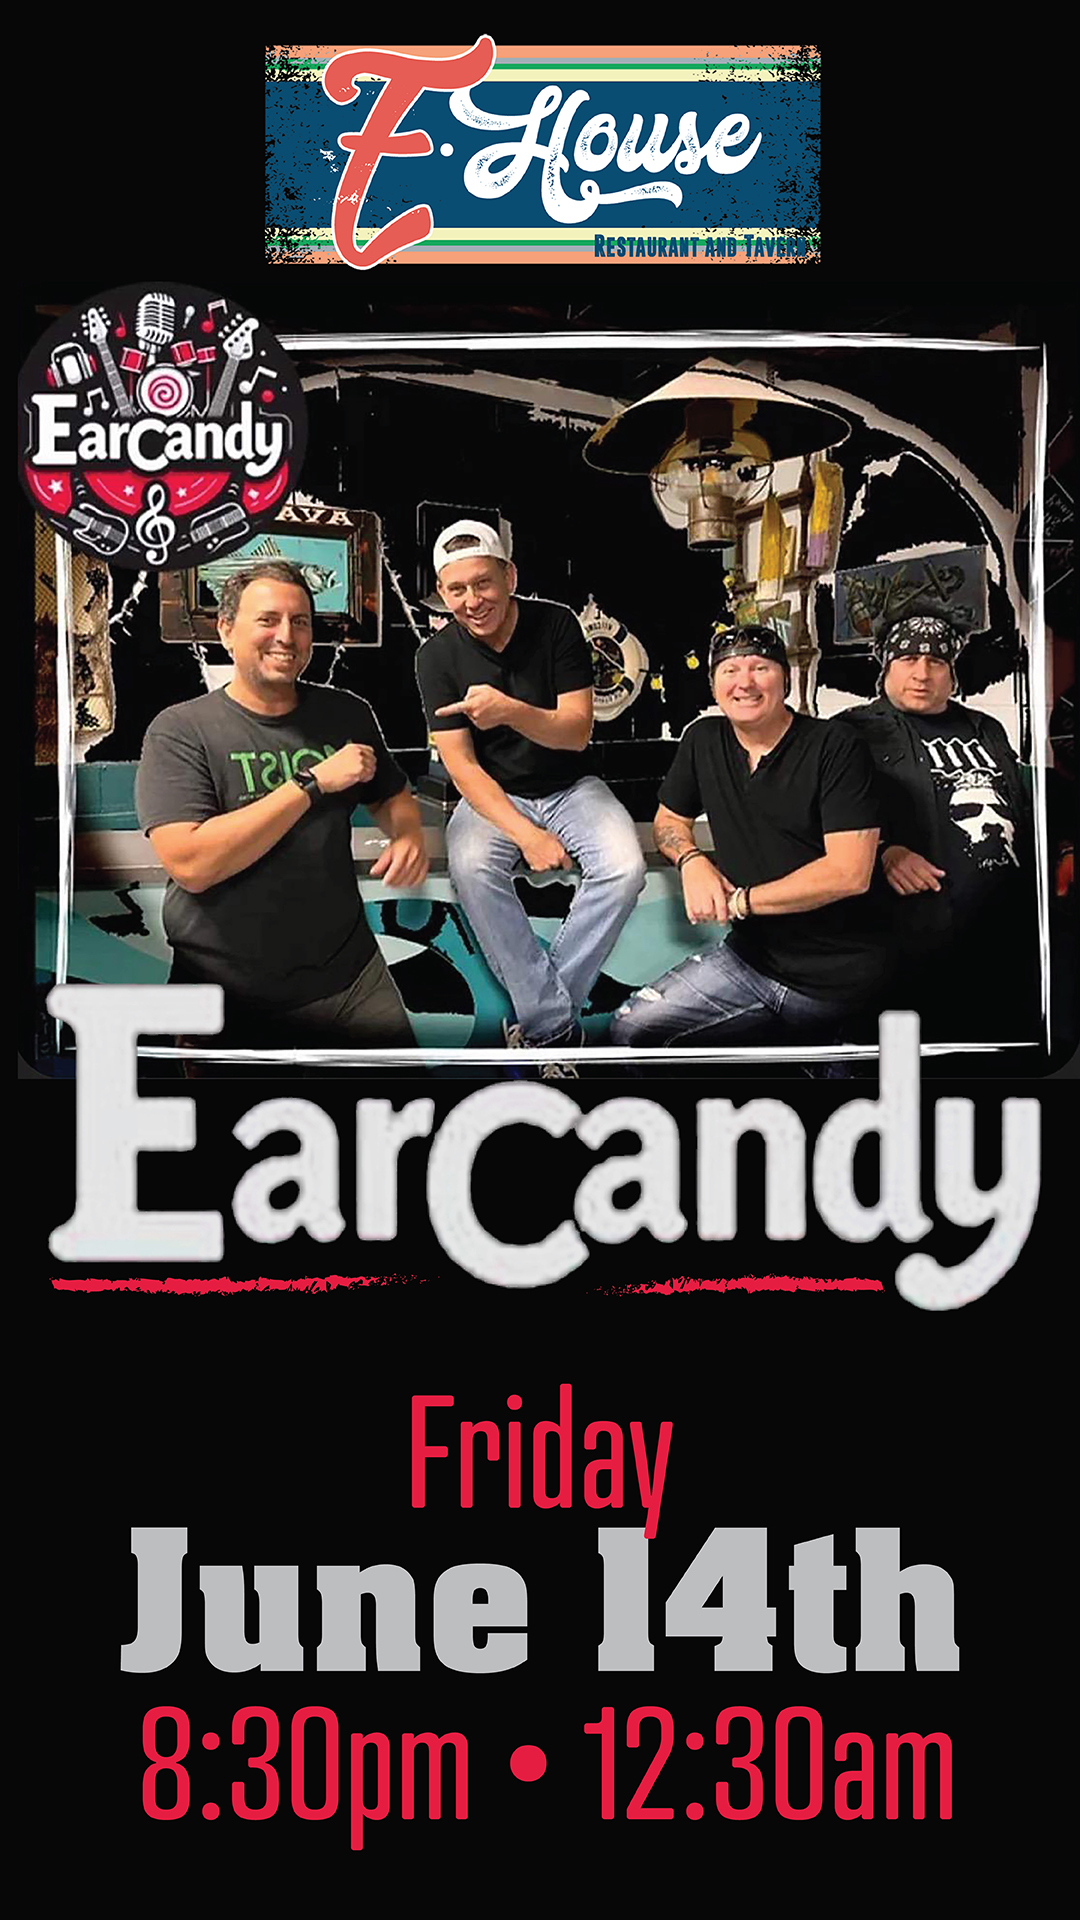 Promotional poster for EarCandy band performing at E-House restaurant and tavern on Friday, June 14th, from 8:30 PM to 12:30 AM. Four band members are pictured in the center.